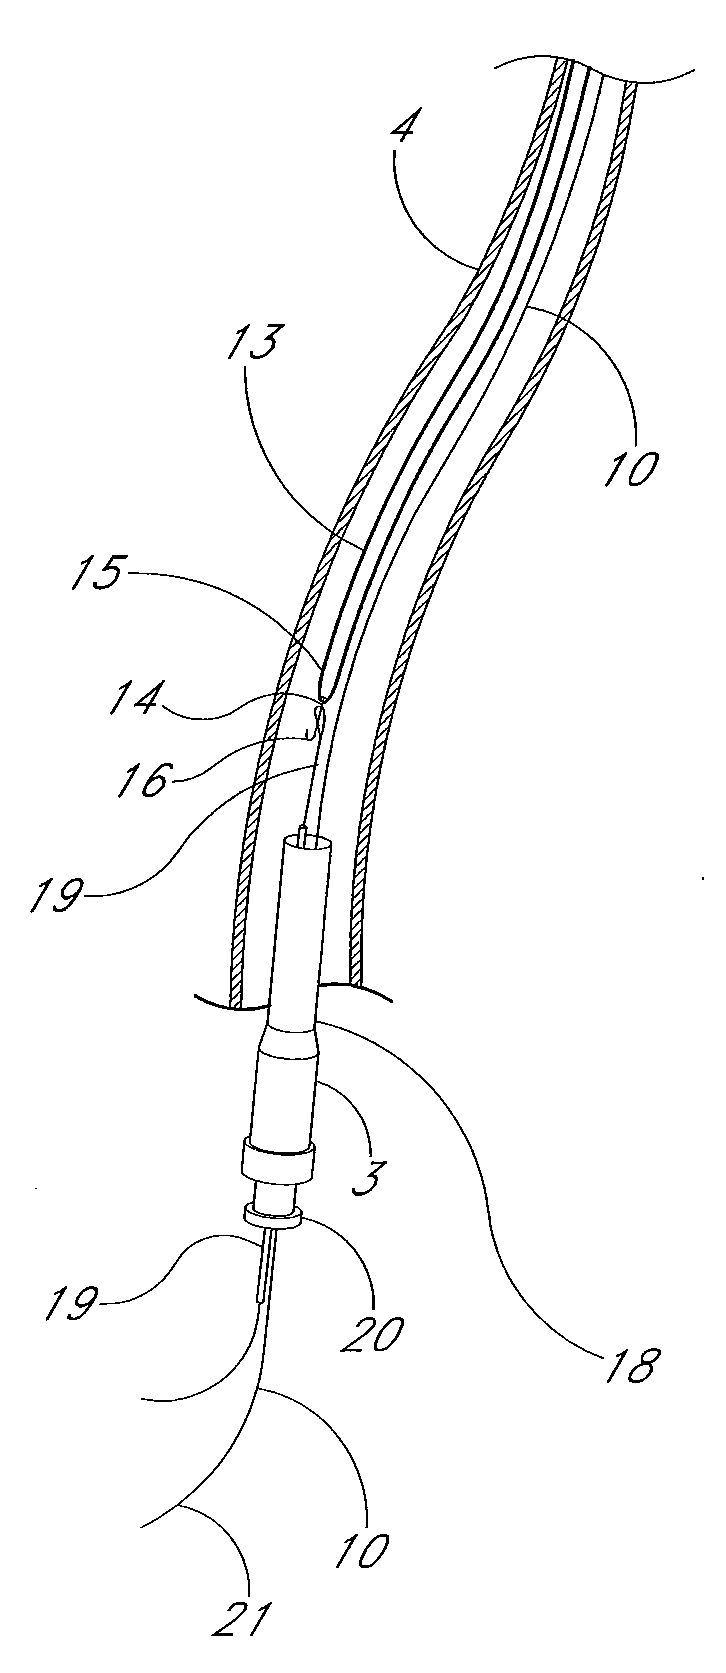 Apparatus and methods for transferring an implanted elongate body to a remote site